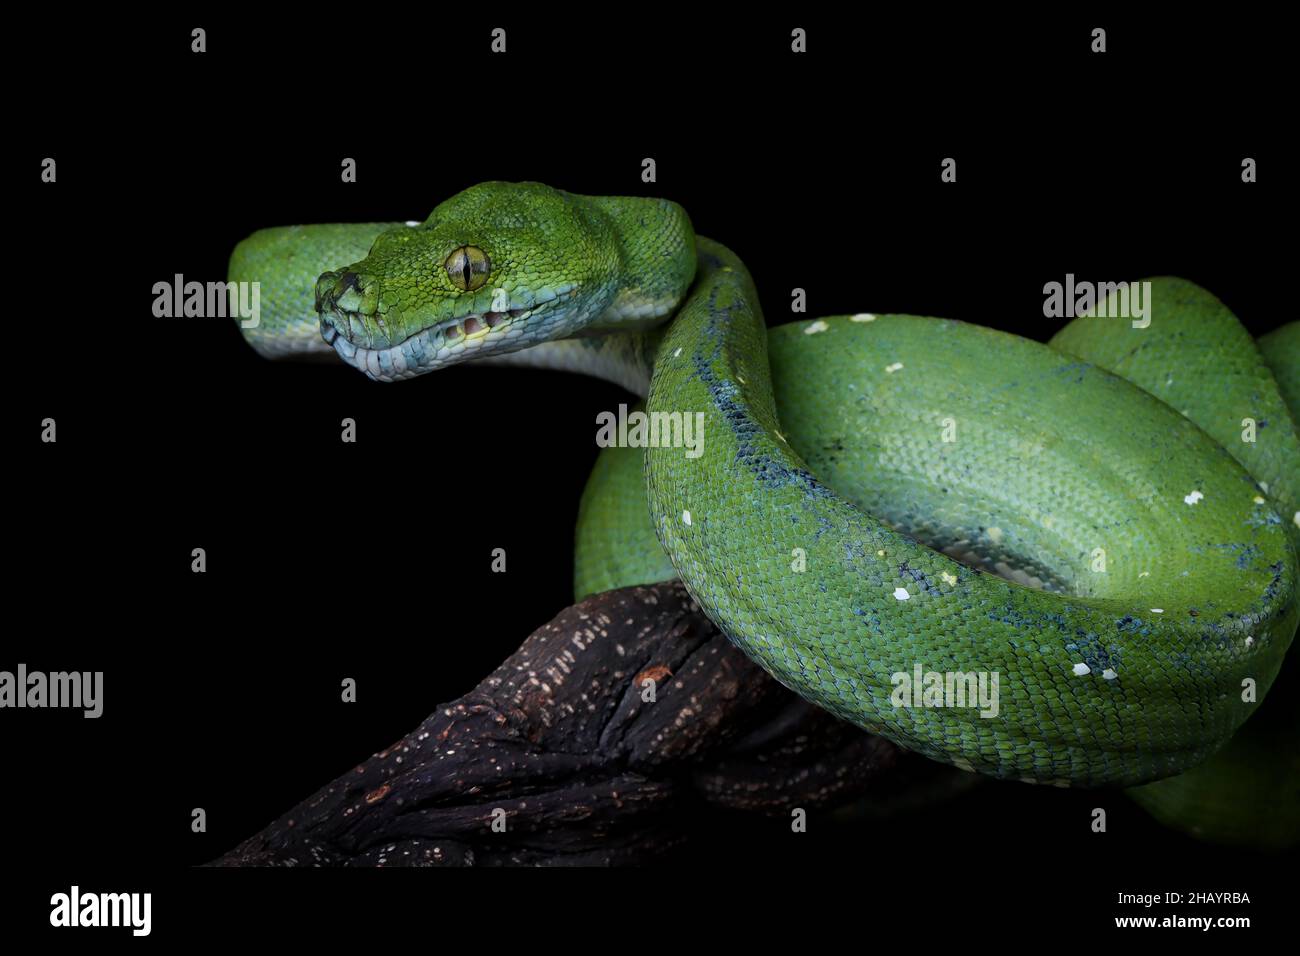 Close-Up of a Green tree python on a branch, Indonesia Stock Photo